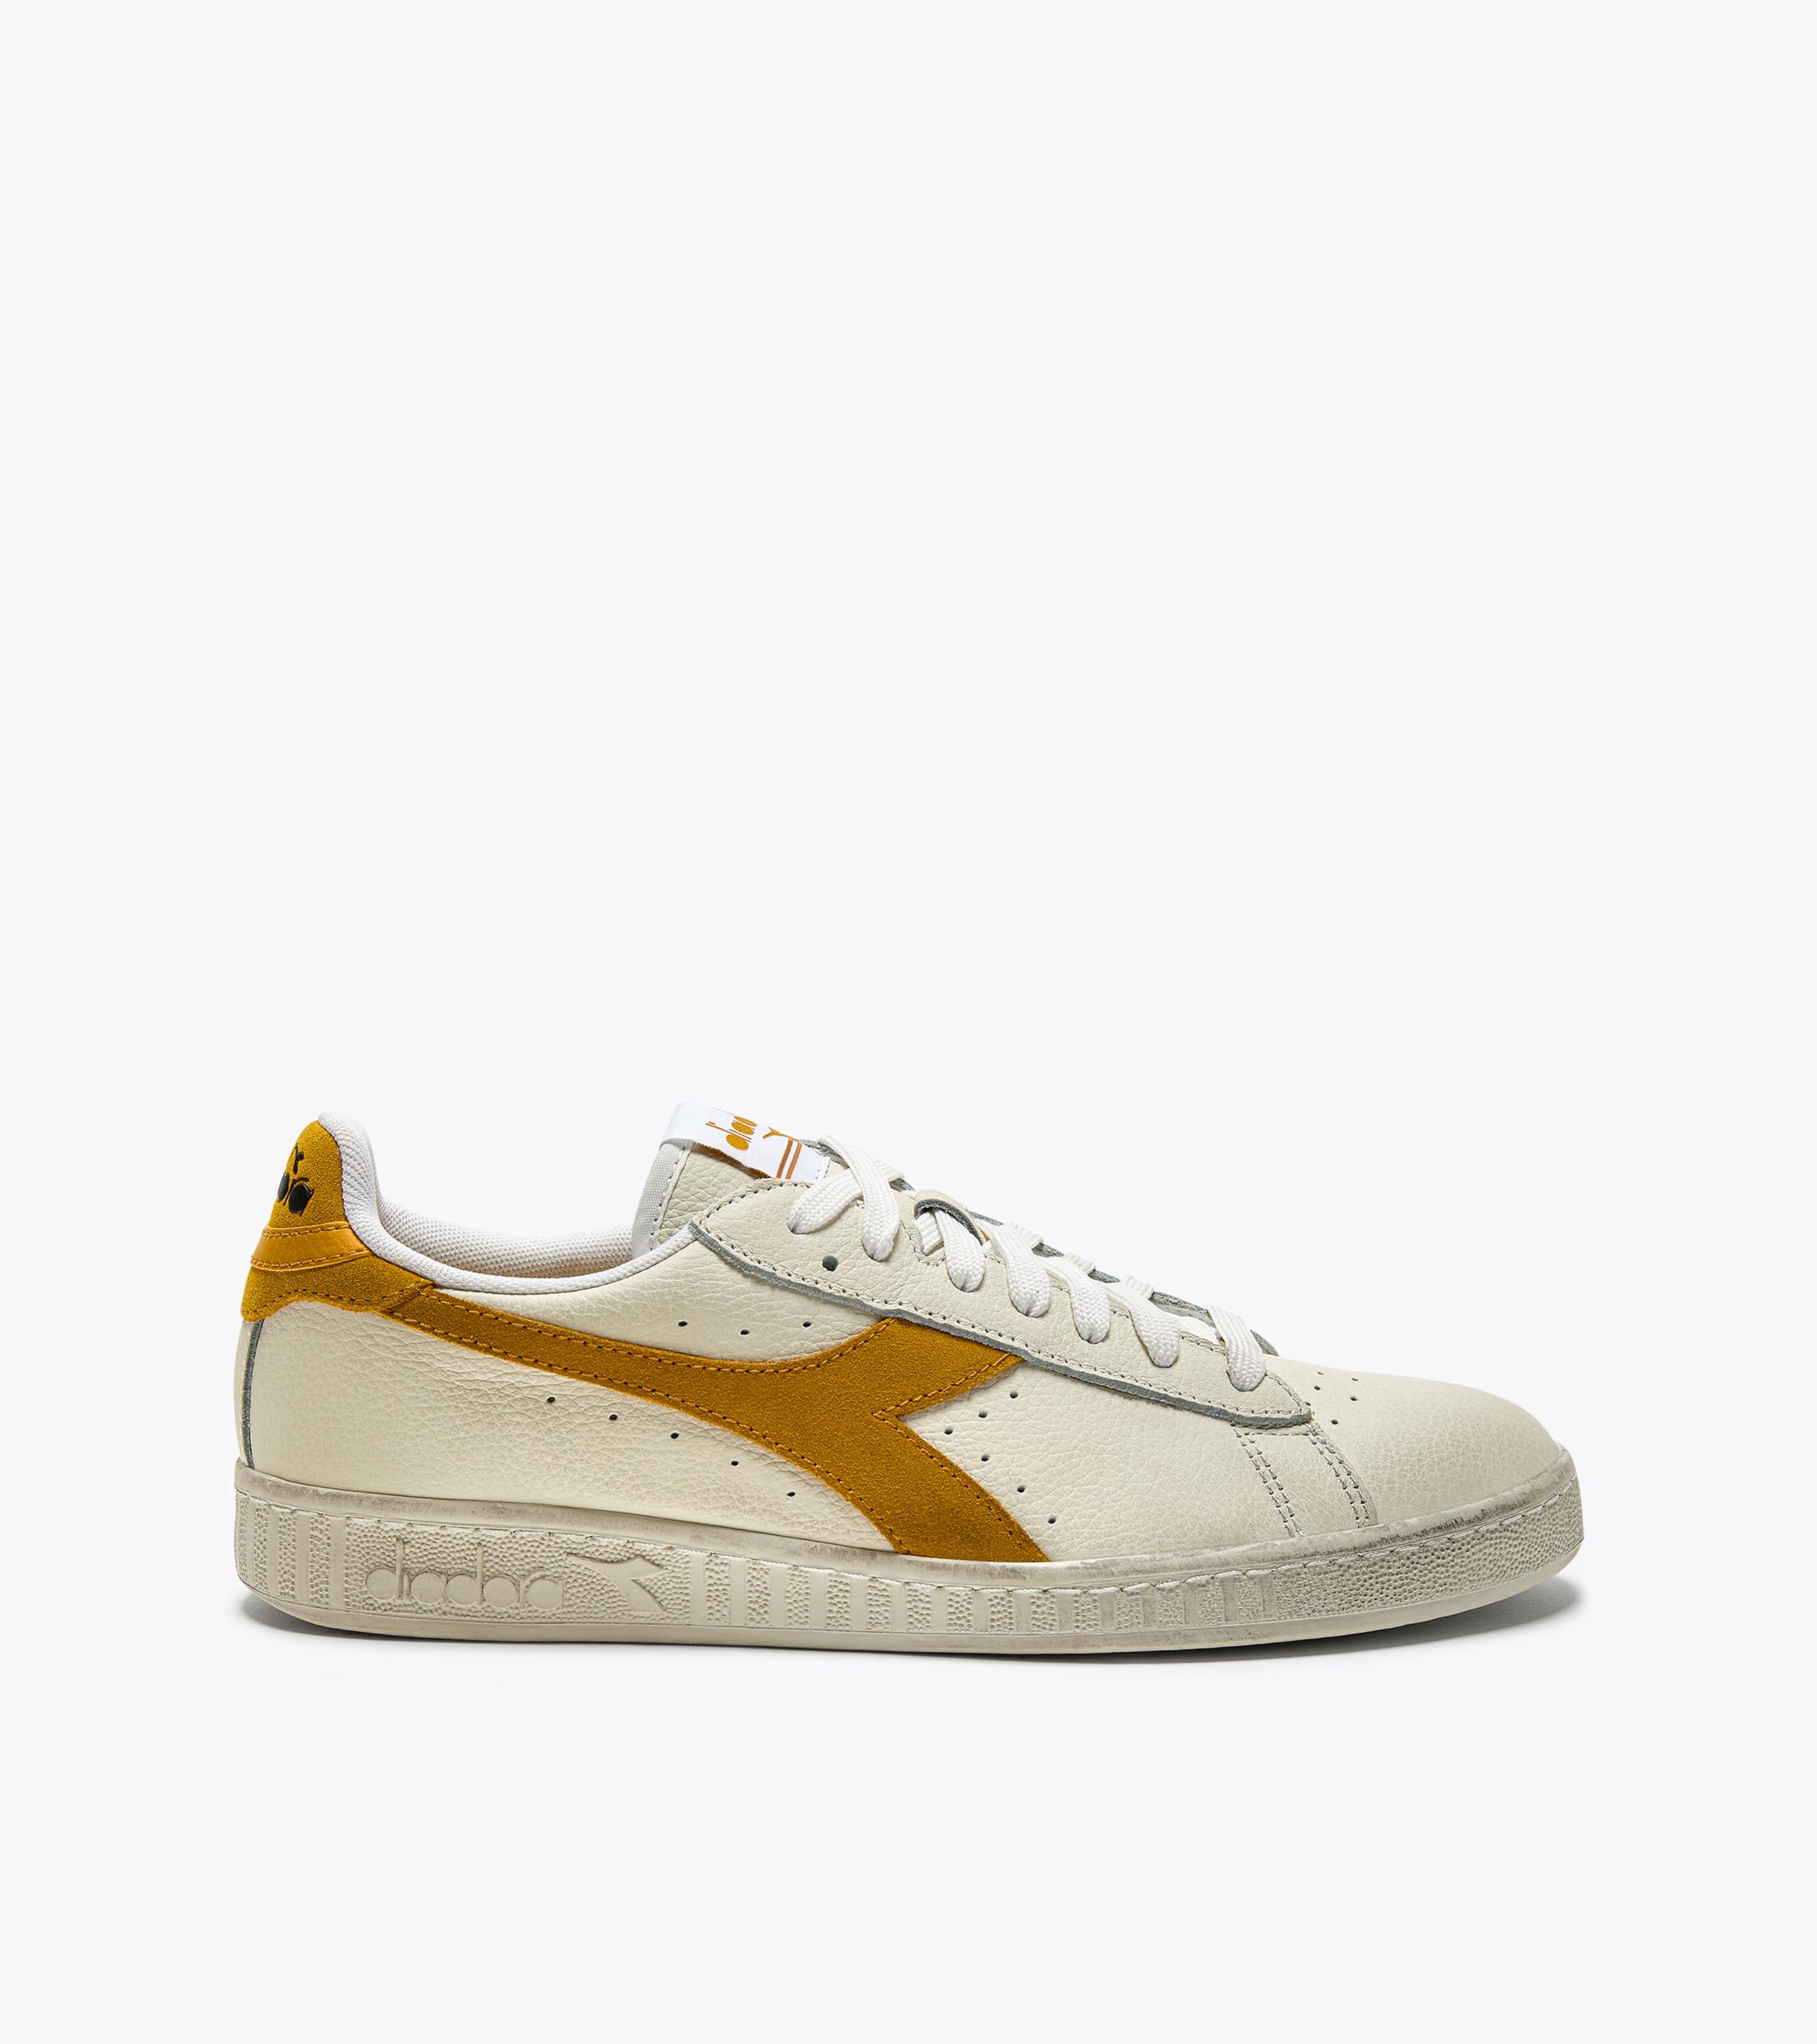 GAME L LOW WAXED SUEDE POP Sporty sneakers - Gender neutral - Diadora ...